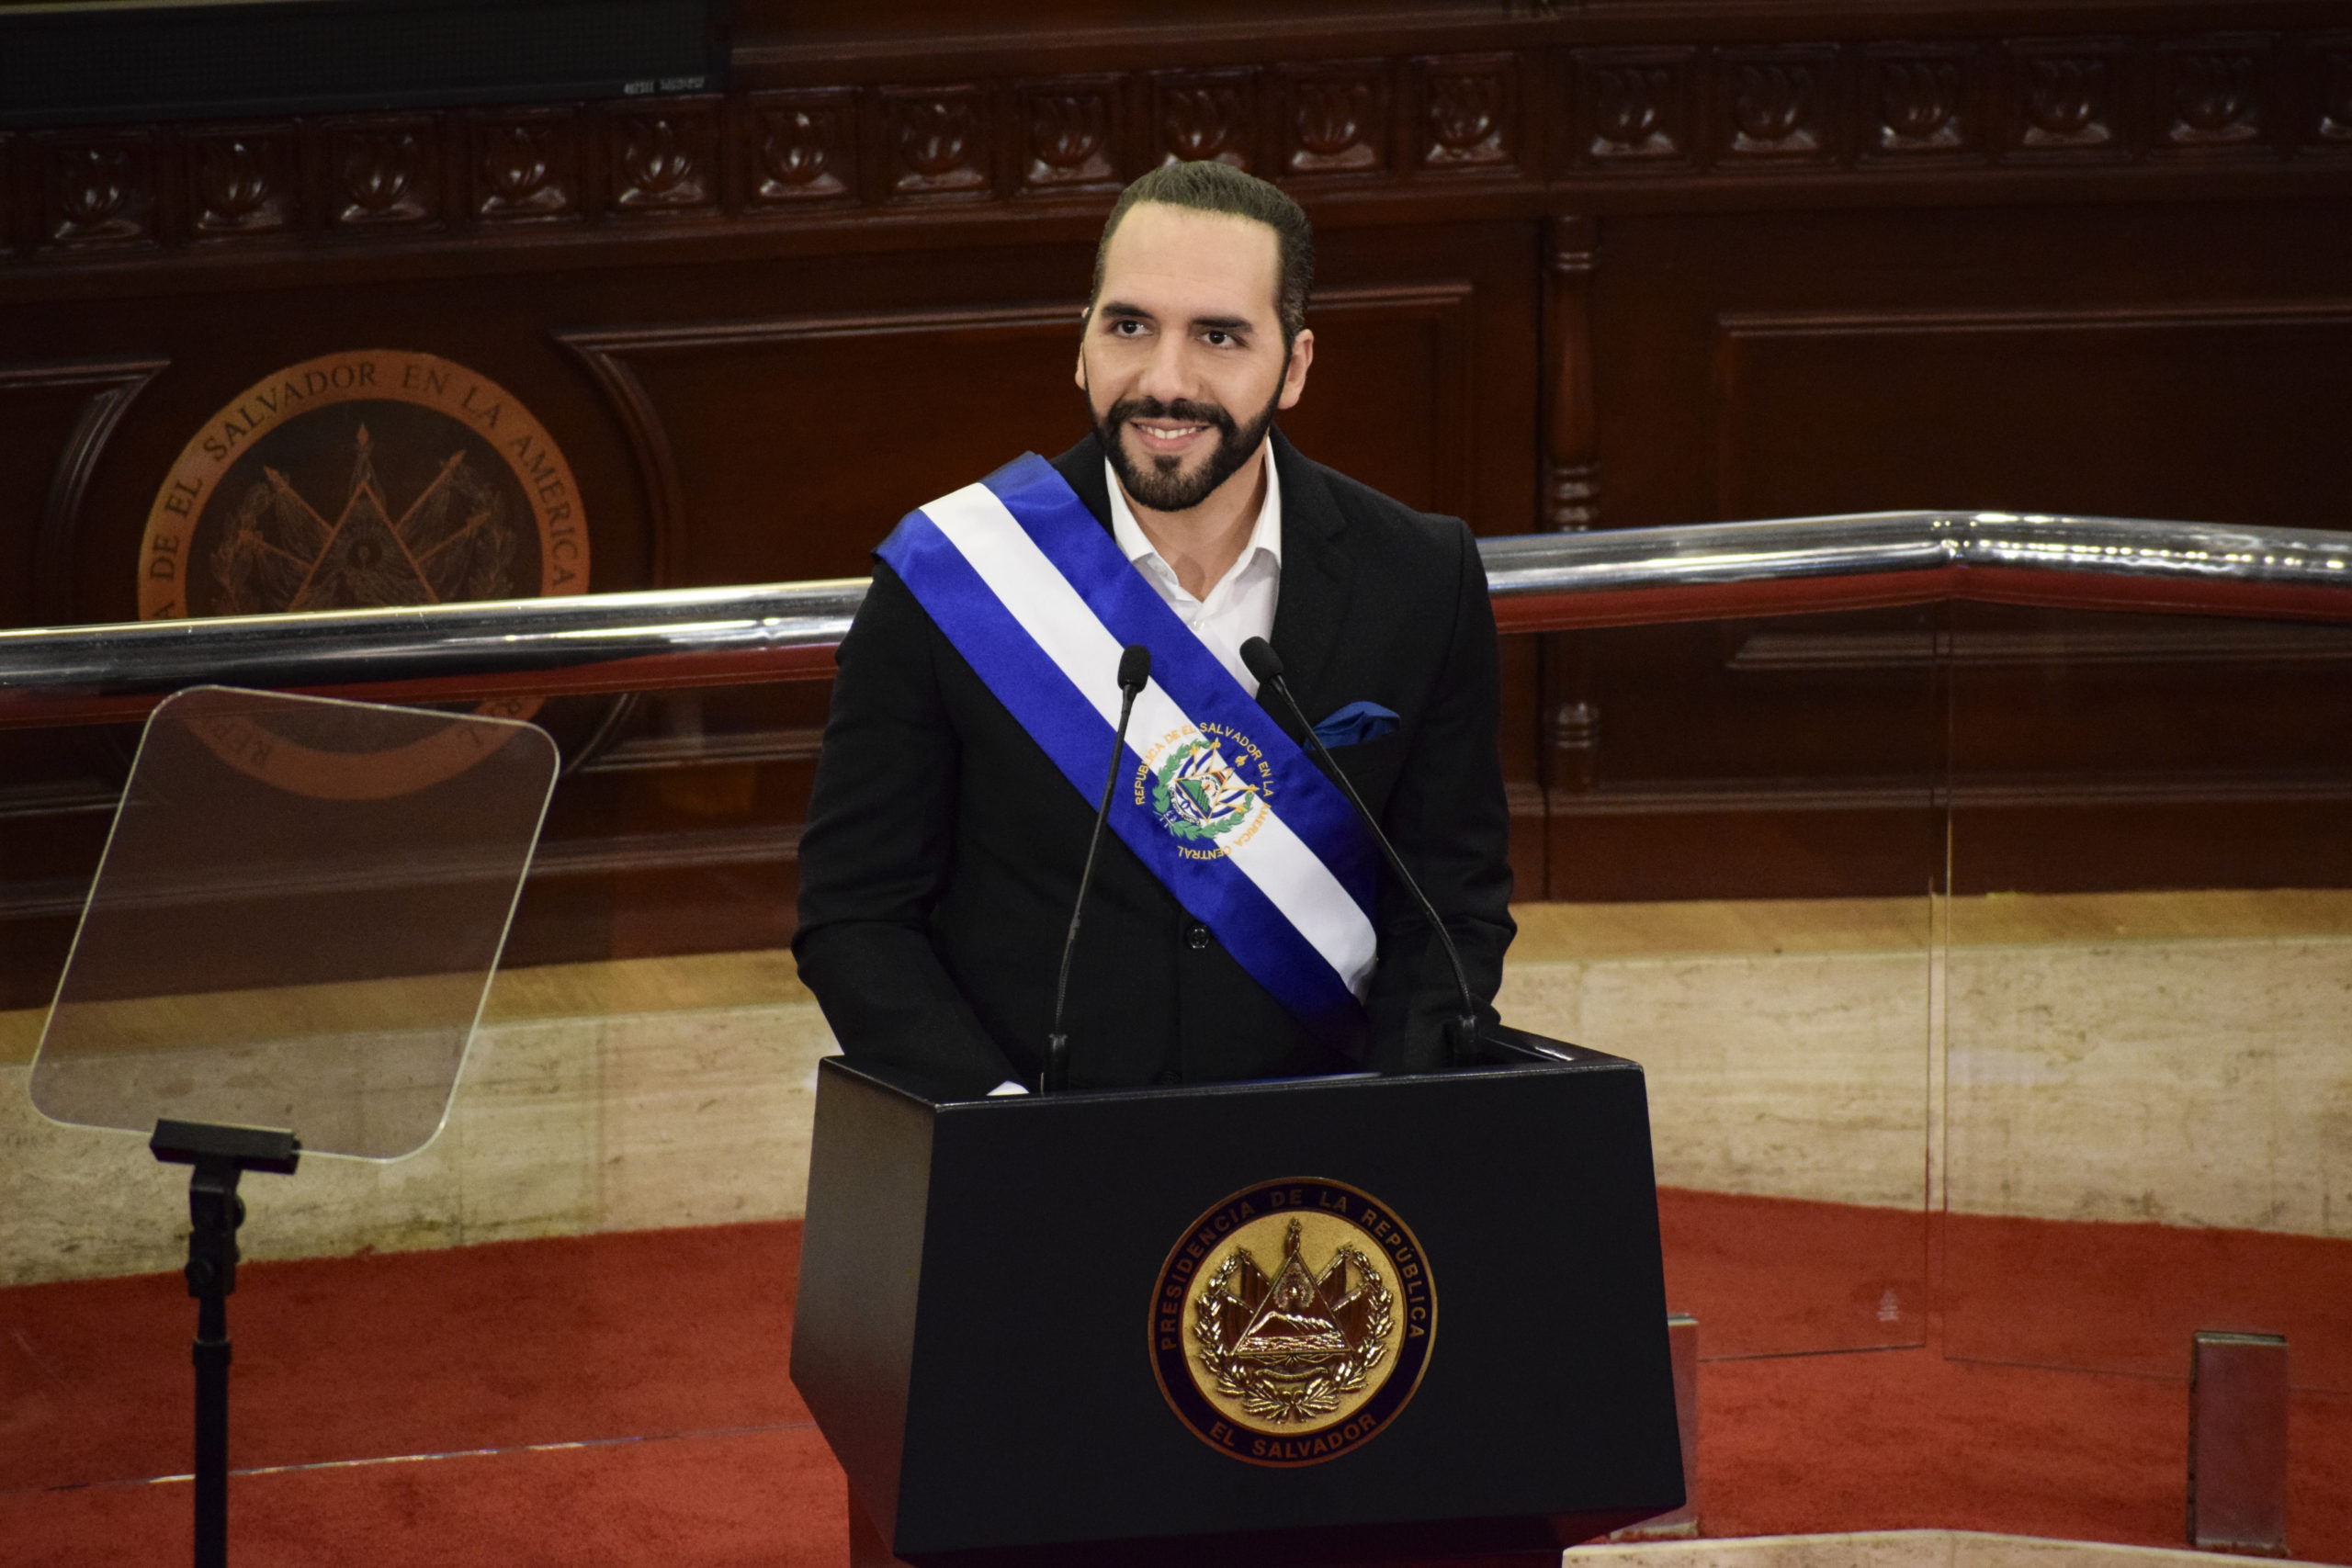 El Salvador's Bitcoin-mad president adds 80 more coins at $19,000 each